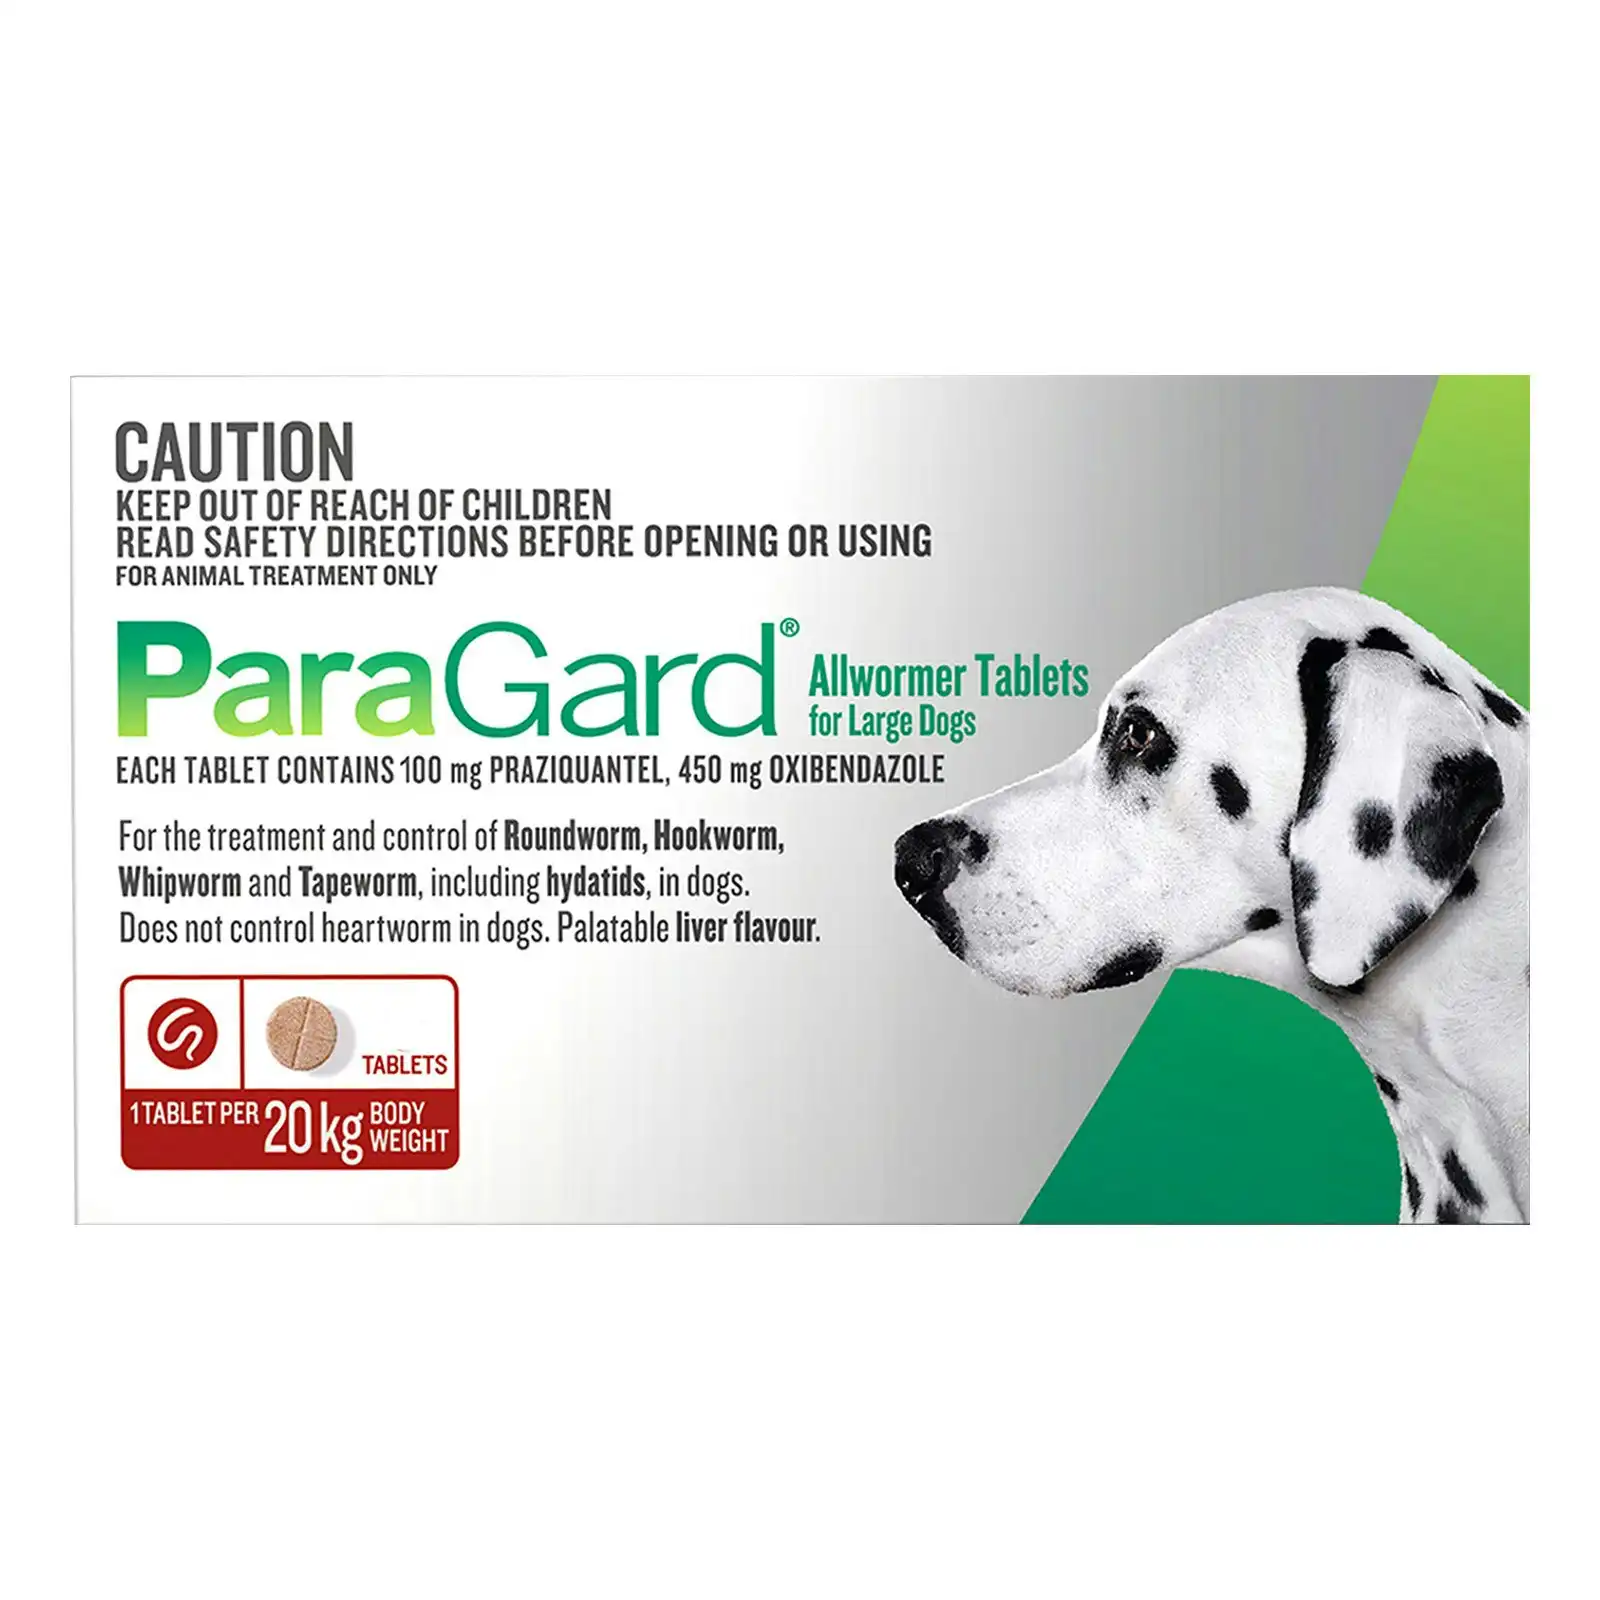 Paragard Allwormer Tablets For Large Dogs 20 Kg 3 Tablets RED